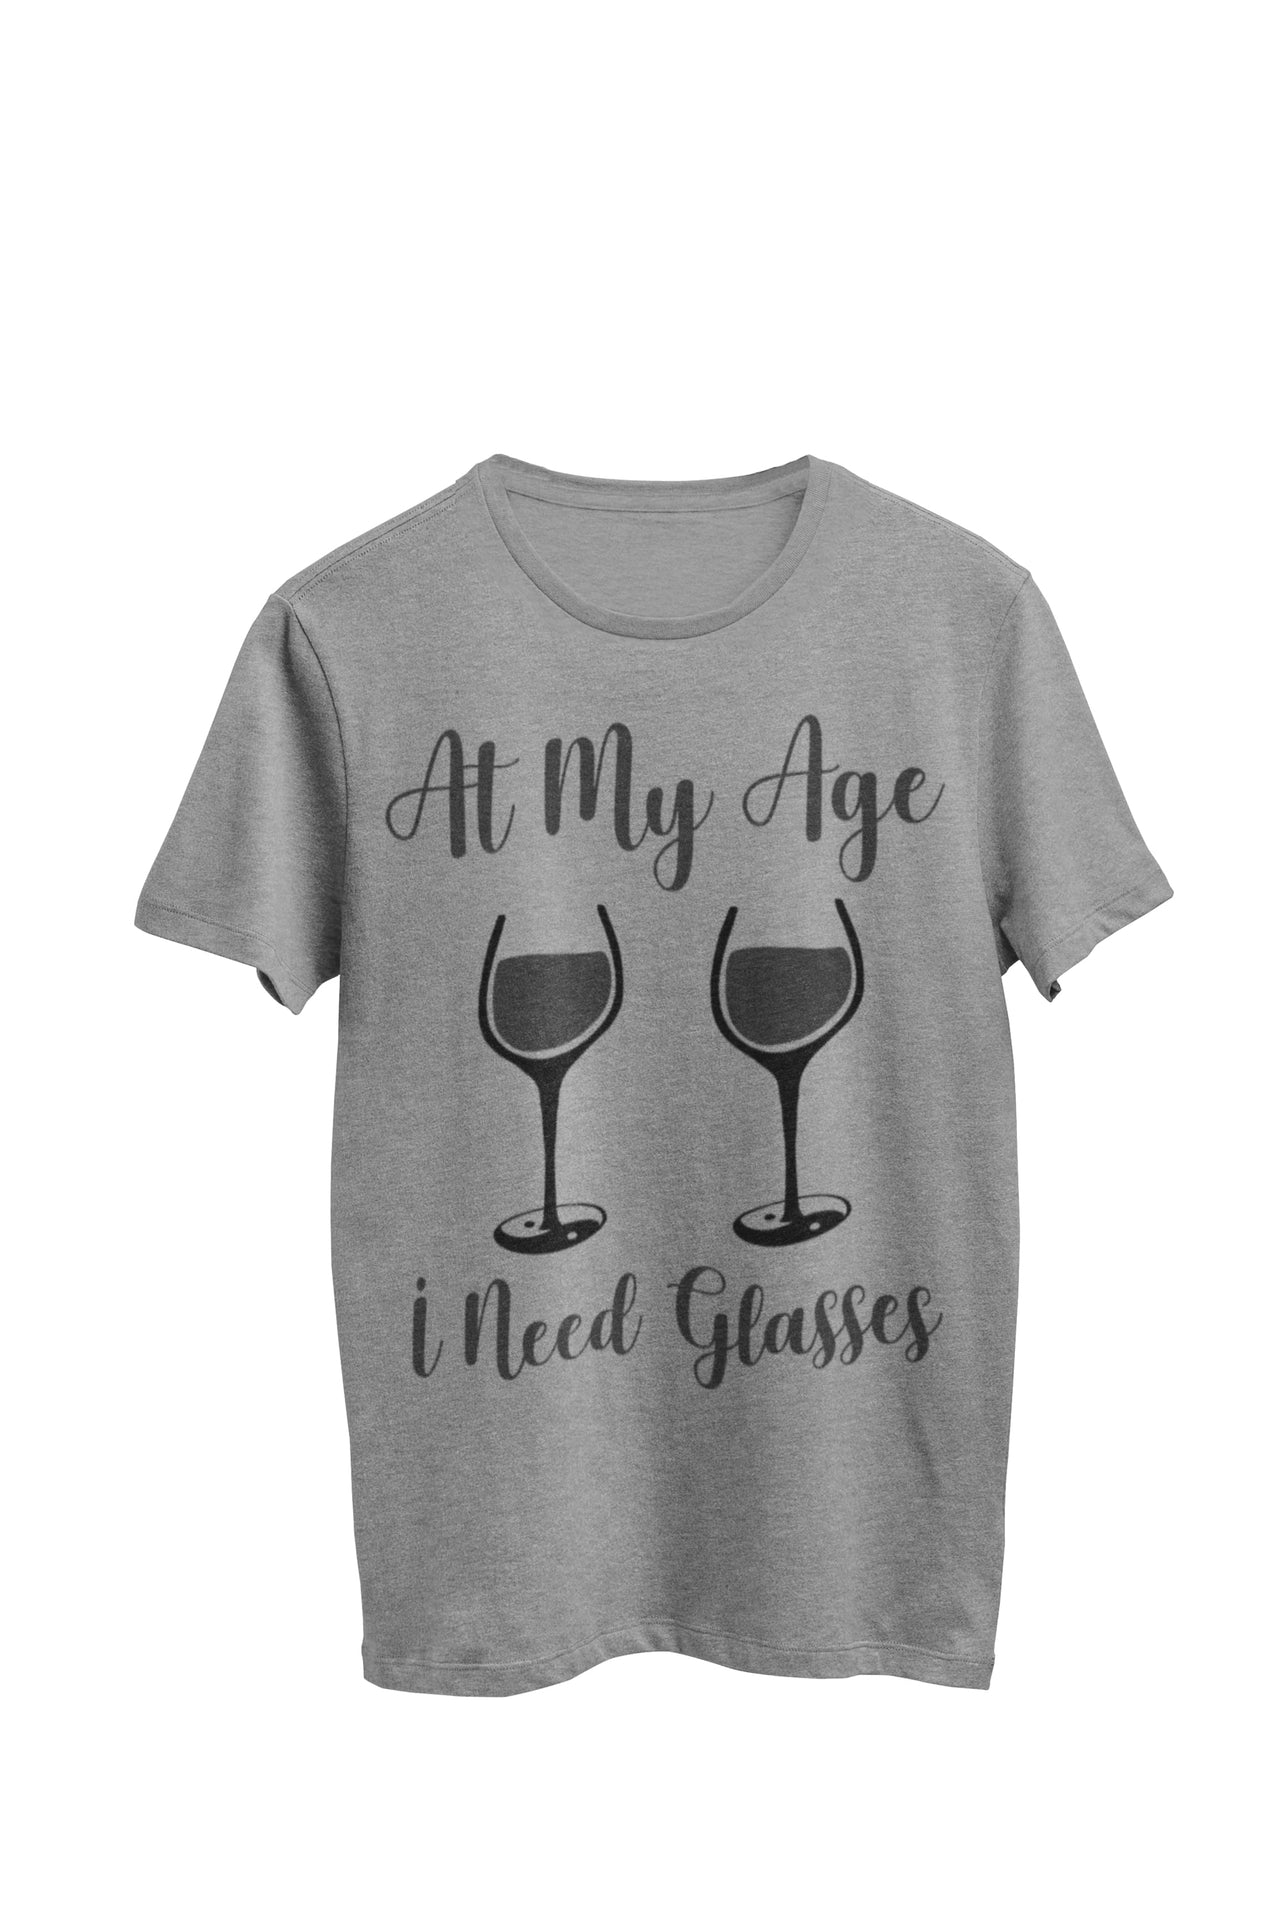 Heather Gray Unisex T-shirt with the text 'At my age I need glasses' and two wine glasses, designed by WooHoo Apparel